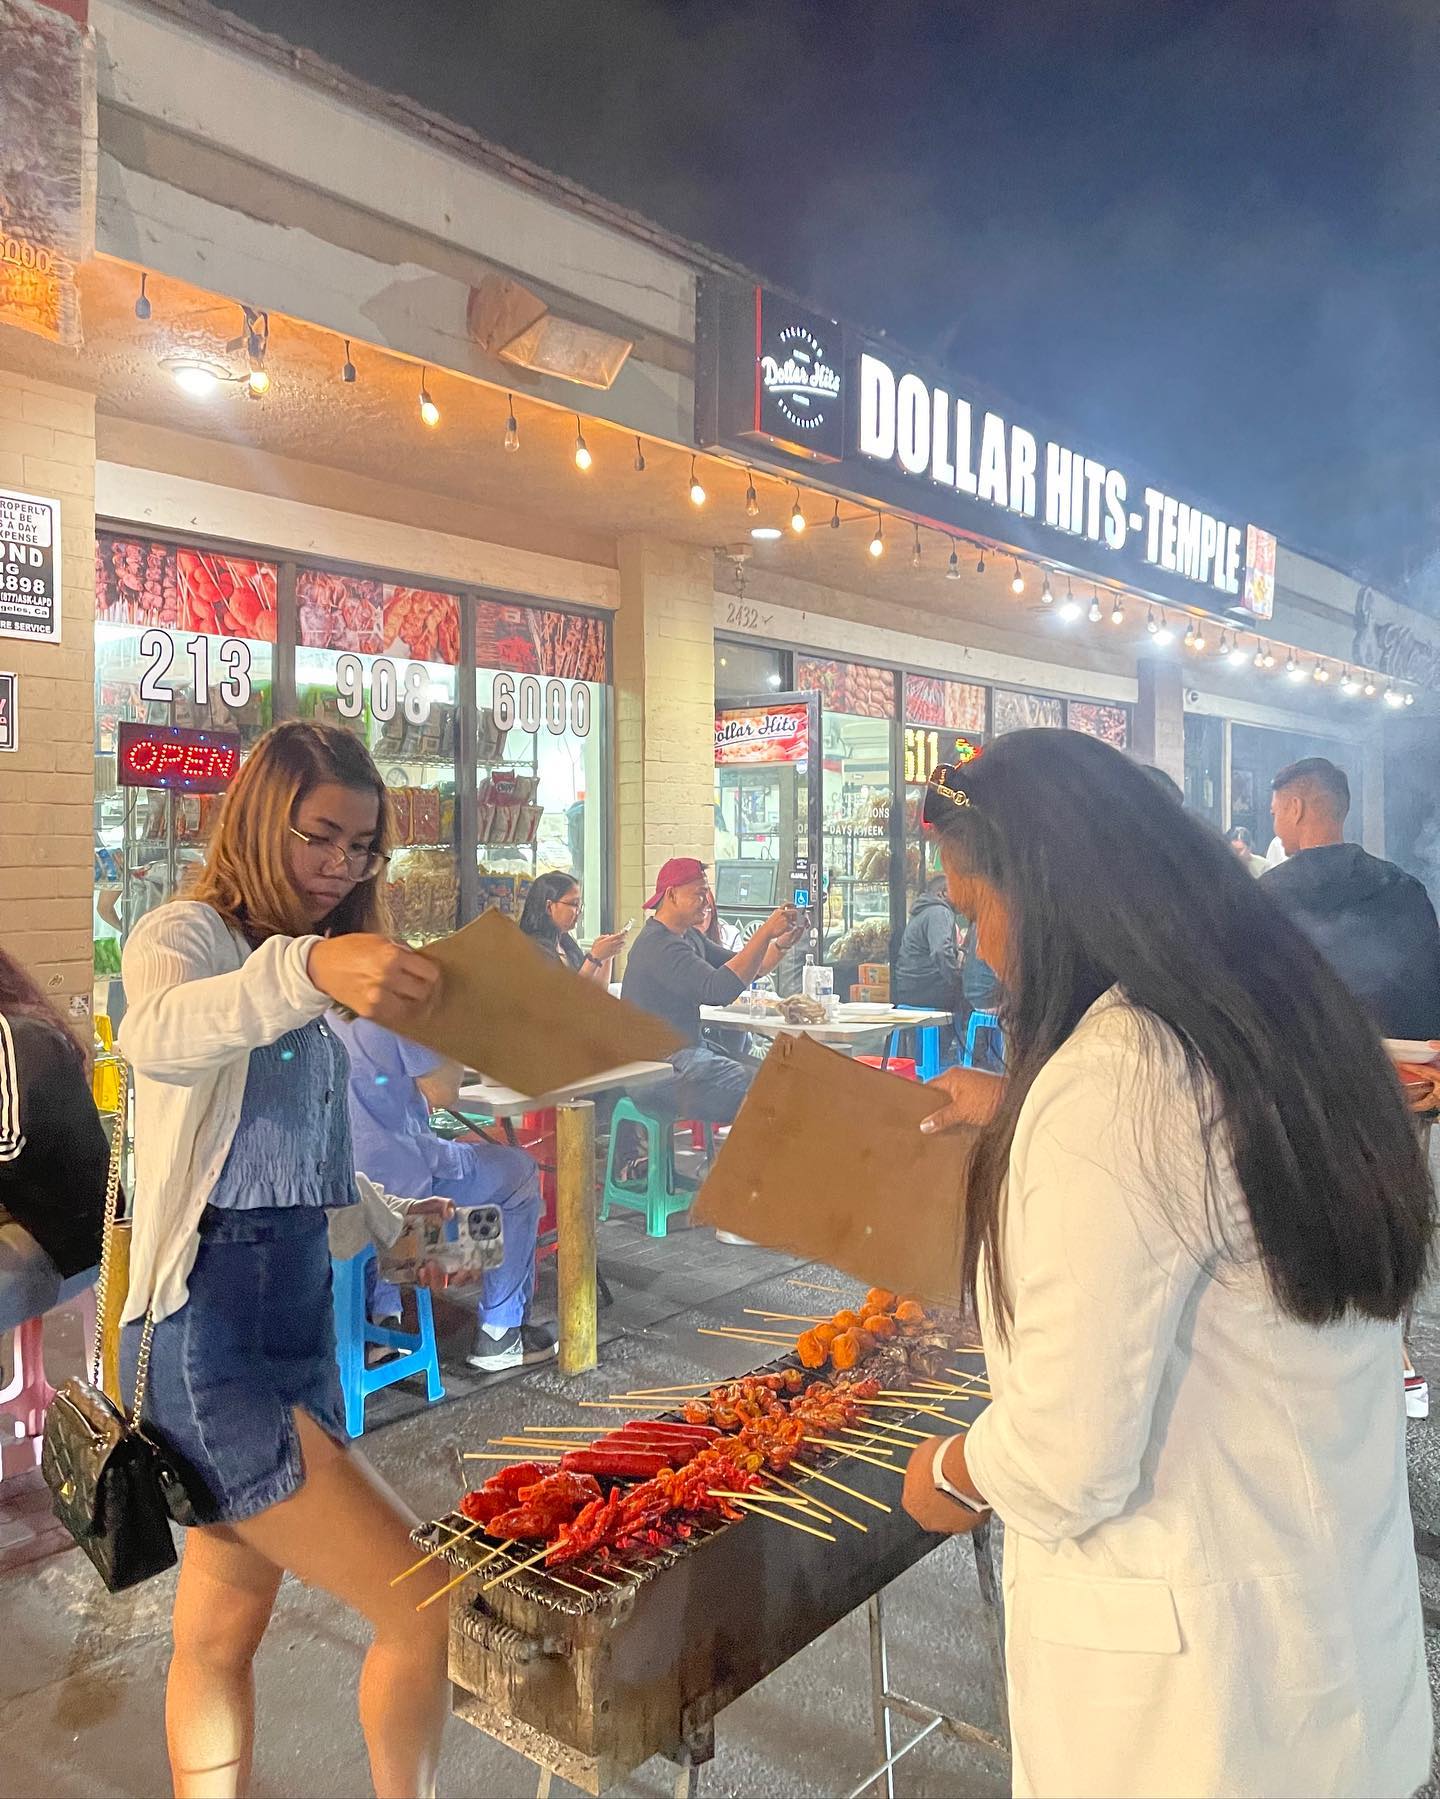 Pinoy $1 Street Food Eatery In LA Featured On Hit Netflix Show "Street Food: USA"